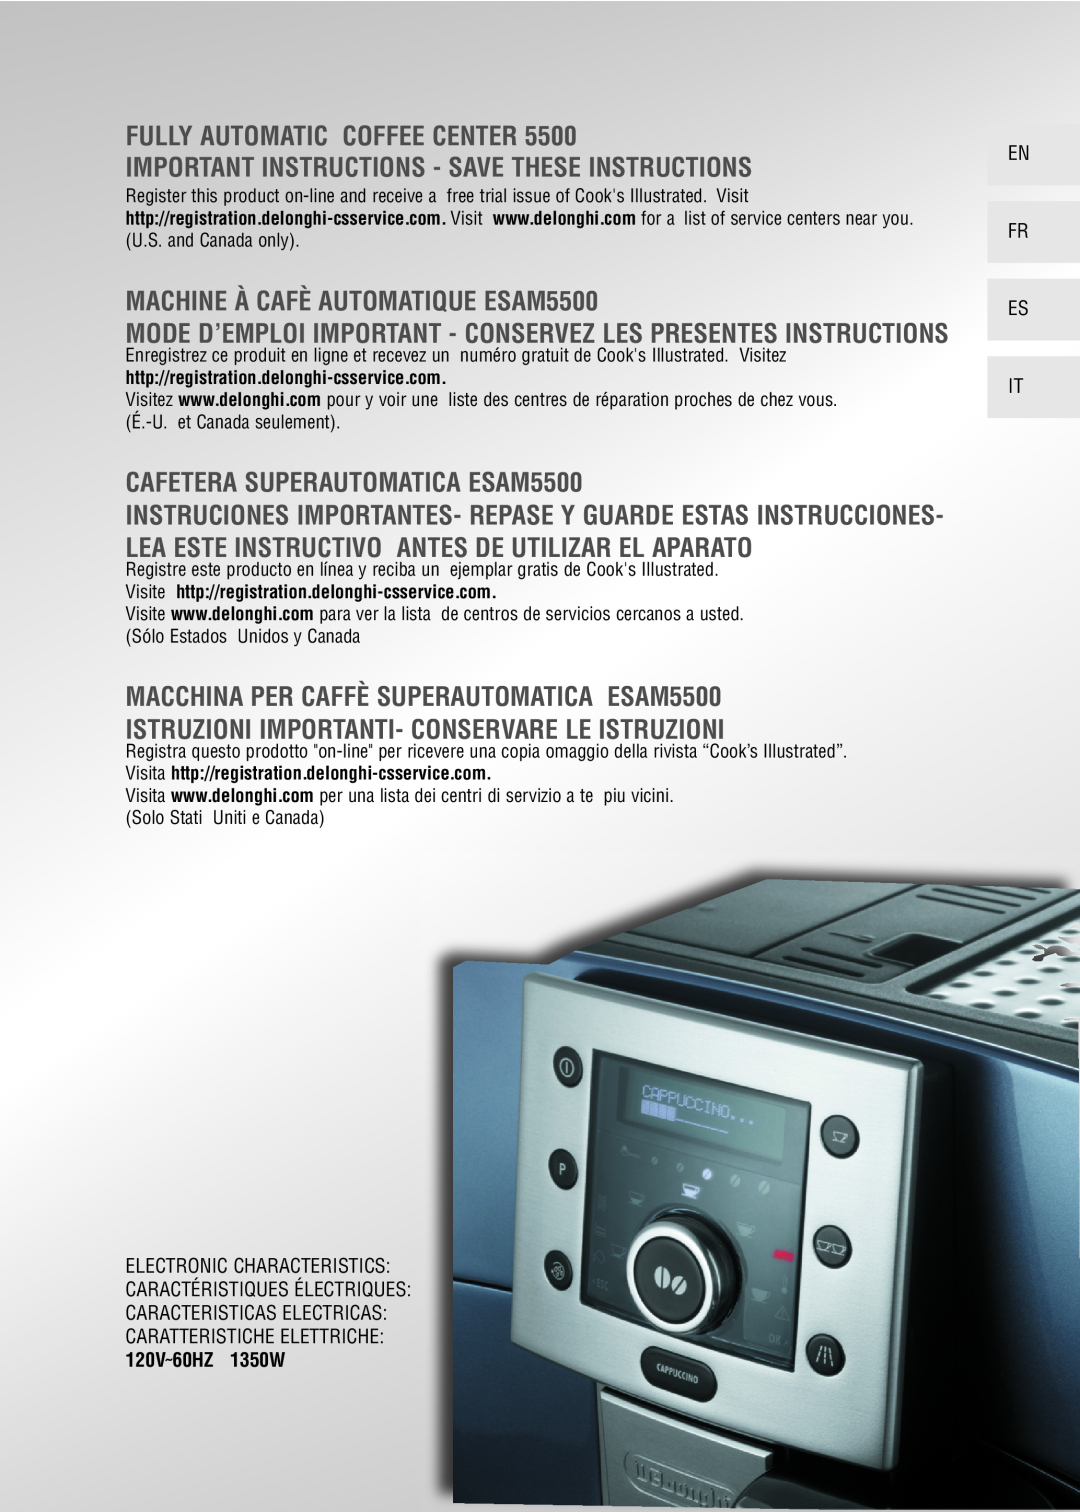 DeLonghi ESAM5500.N manual Fully Automatic Coffee Center, Important Instructions - Save These Instructions 